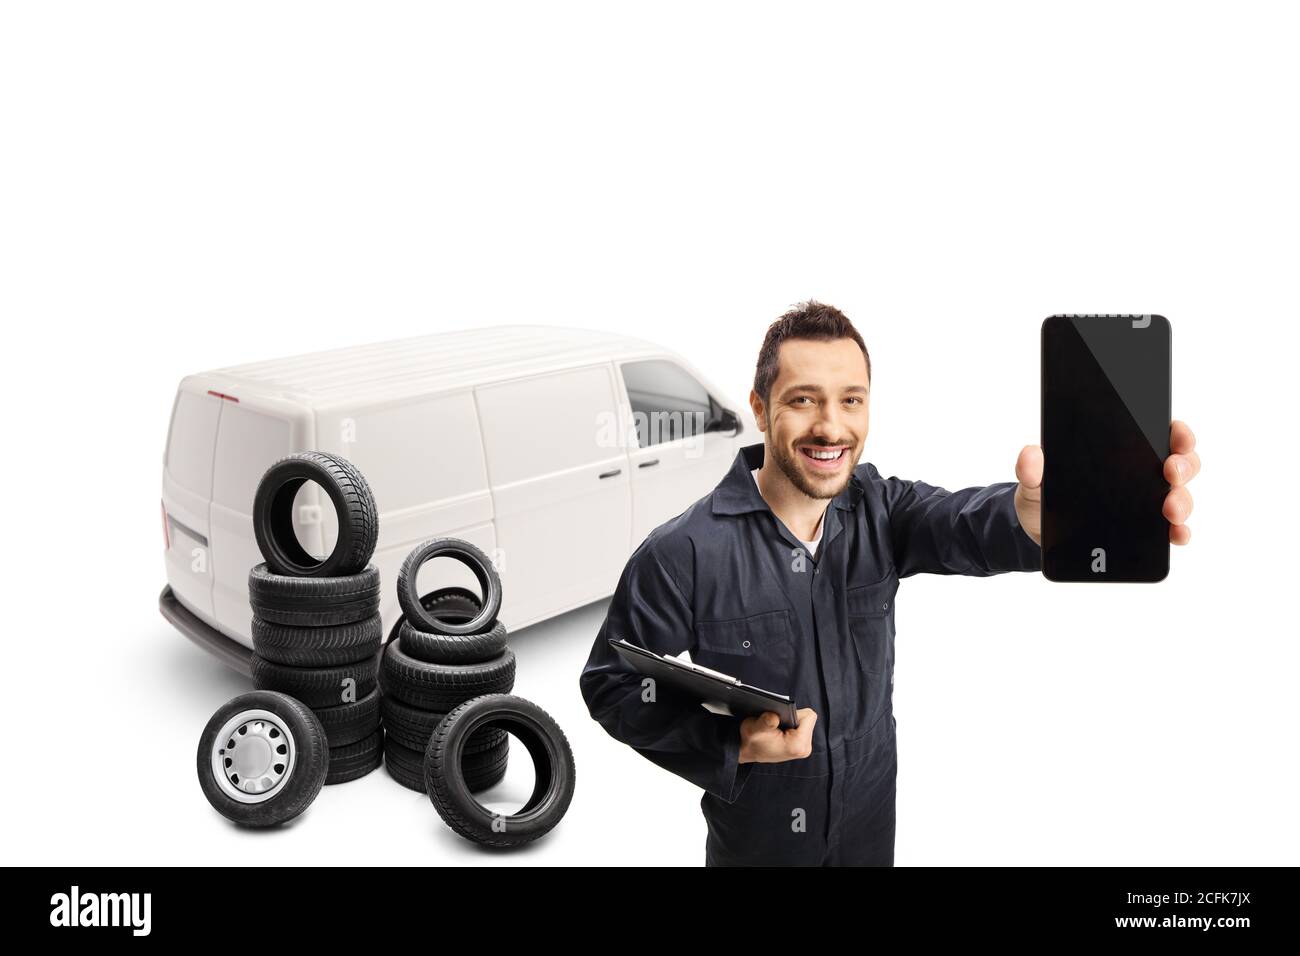 Auto mechanic with a white van holding a mobile phone isolated on white background Stock Photo